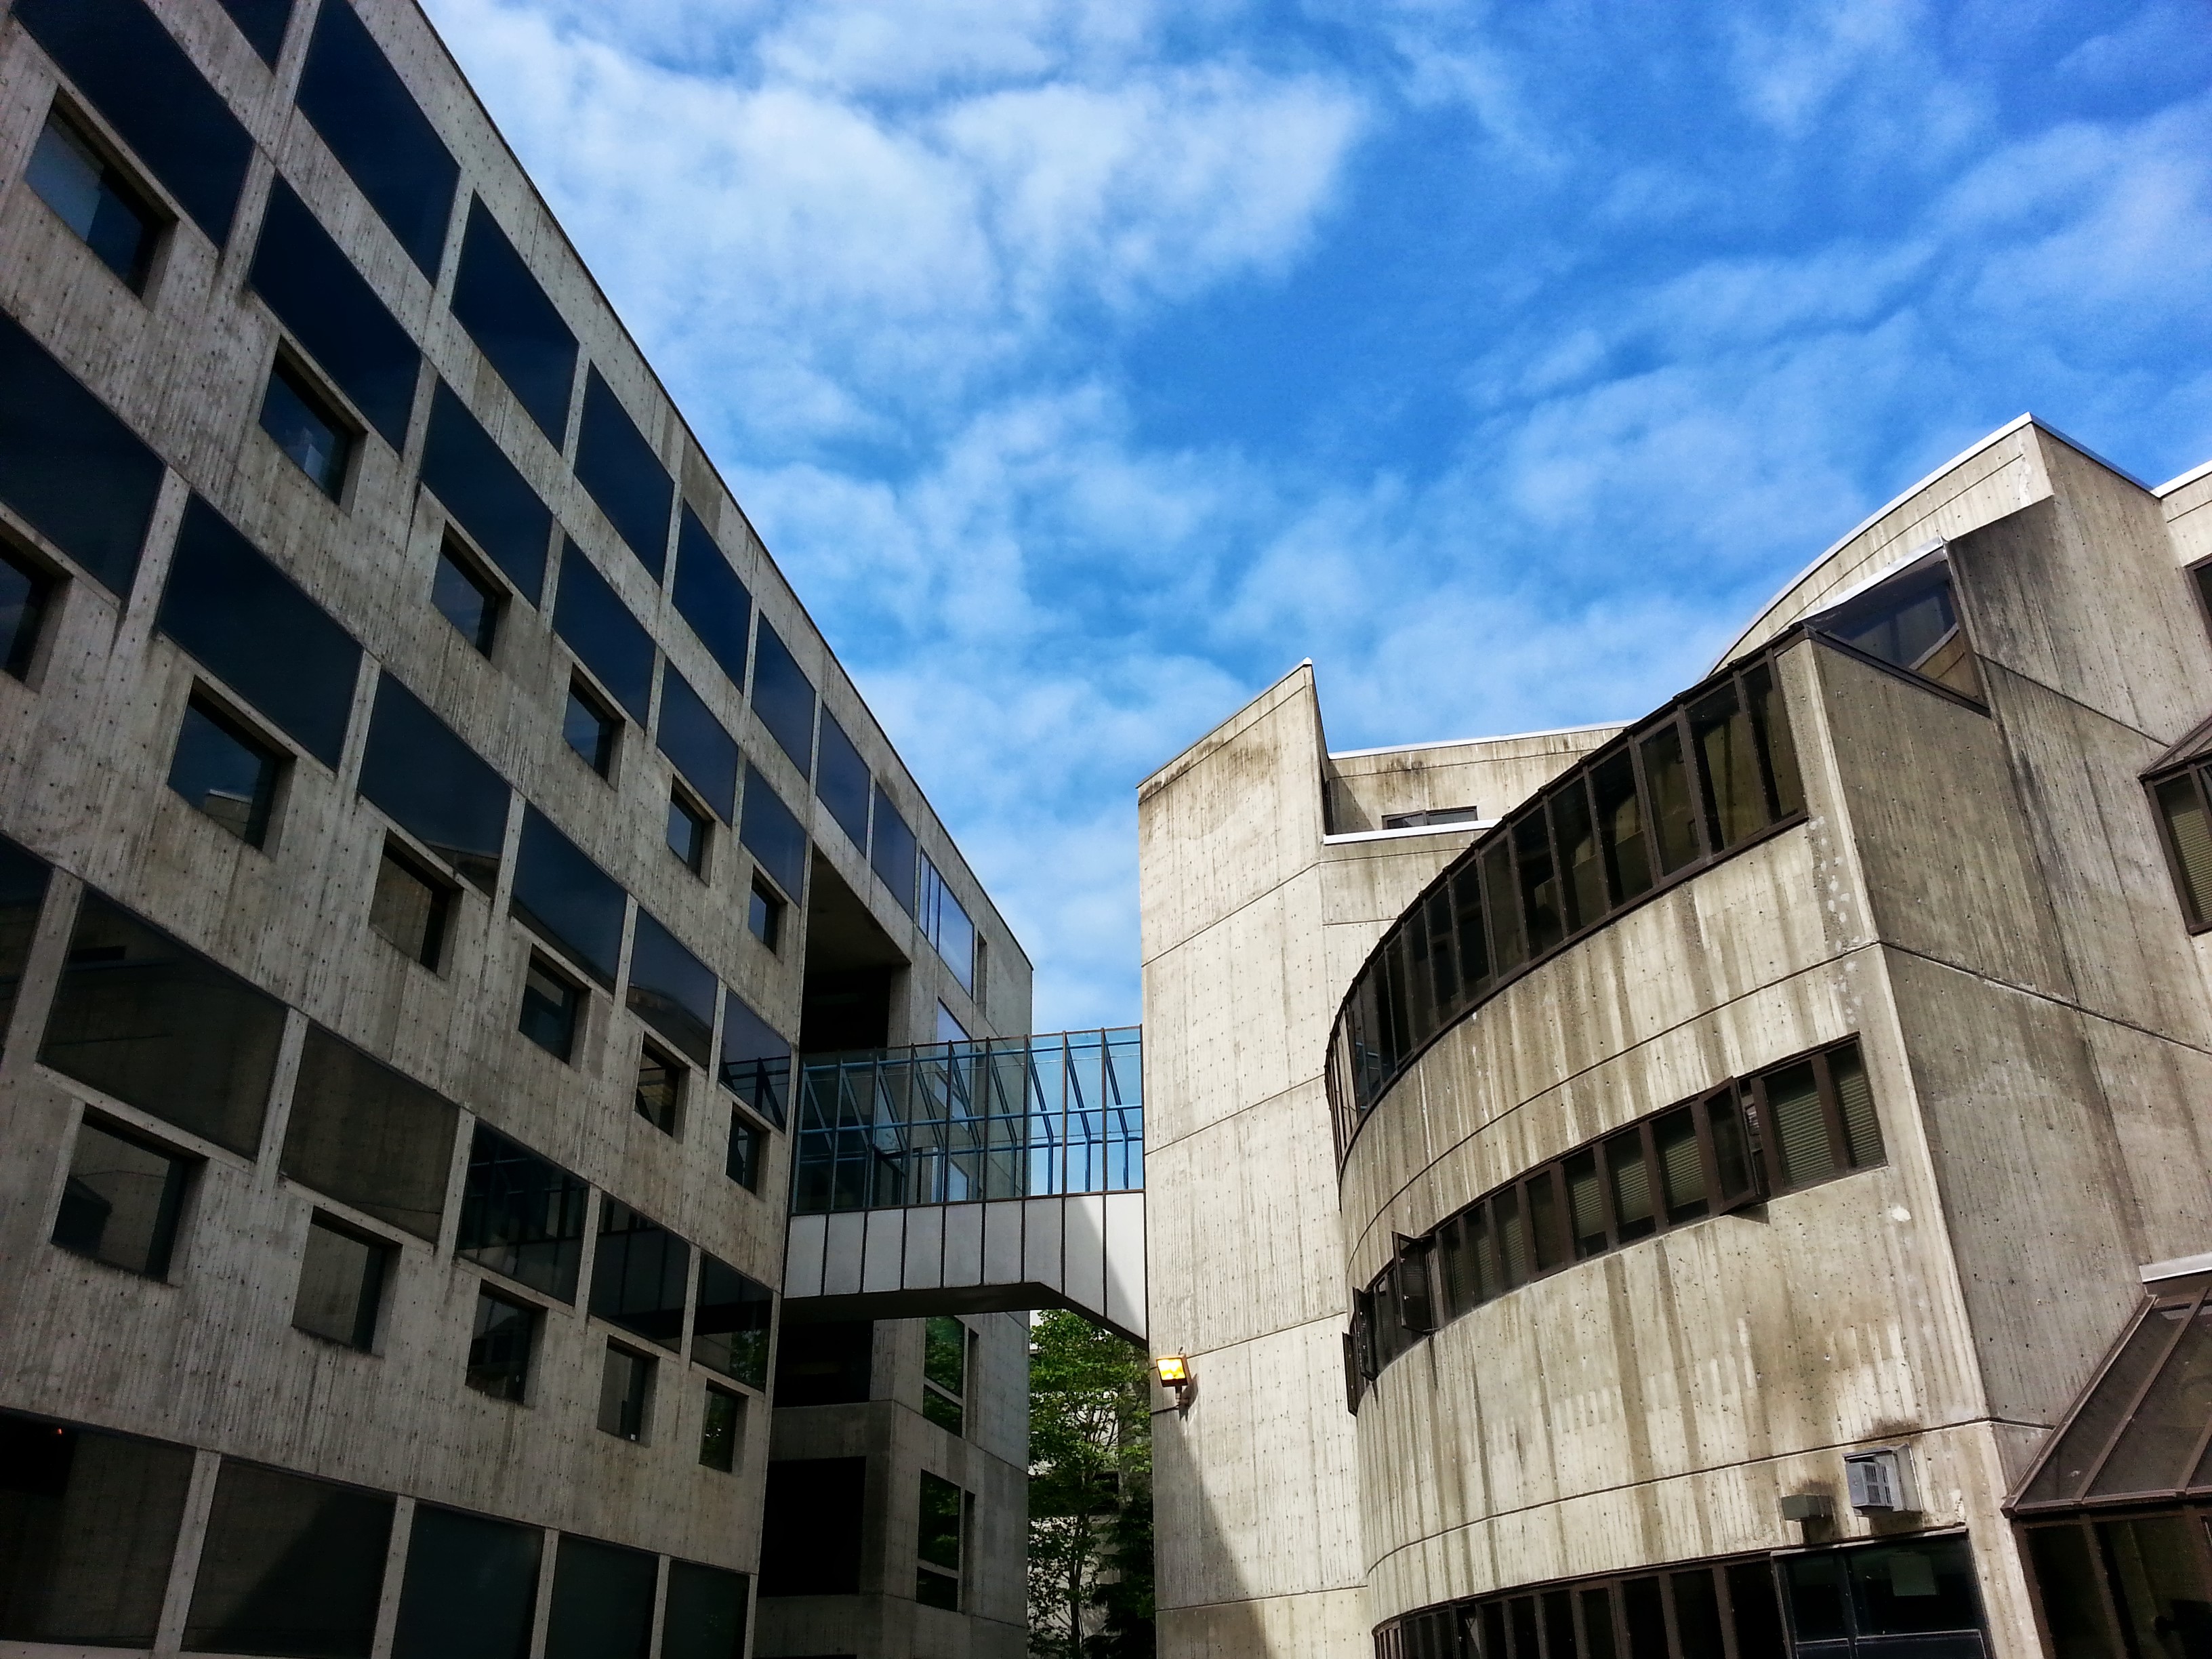 Environmental Studies and Arntzen Hall, large concrete buildings with a skybridge connecting them against a blue sky